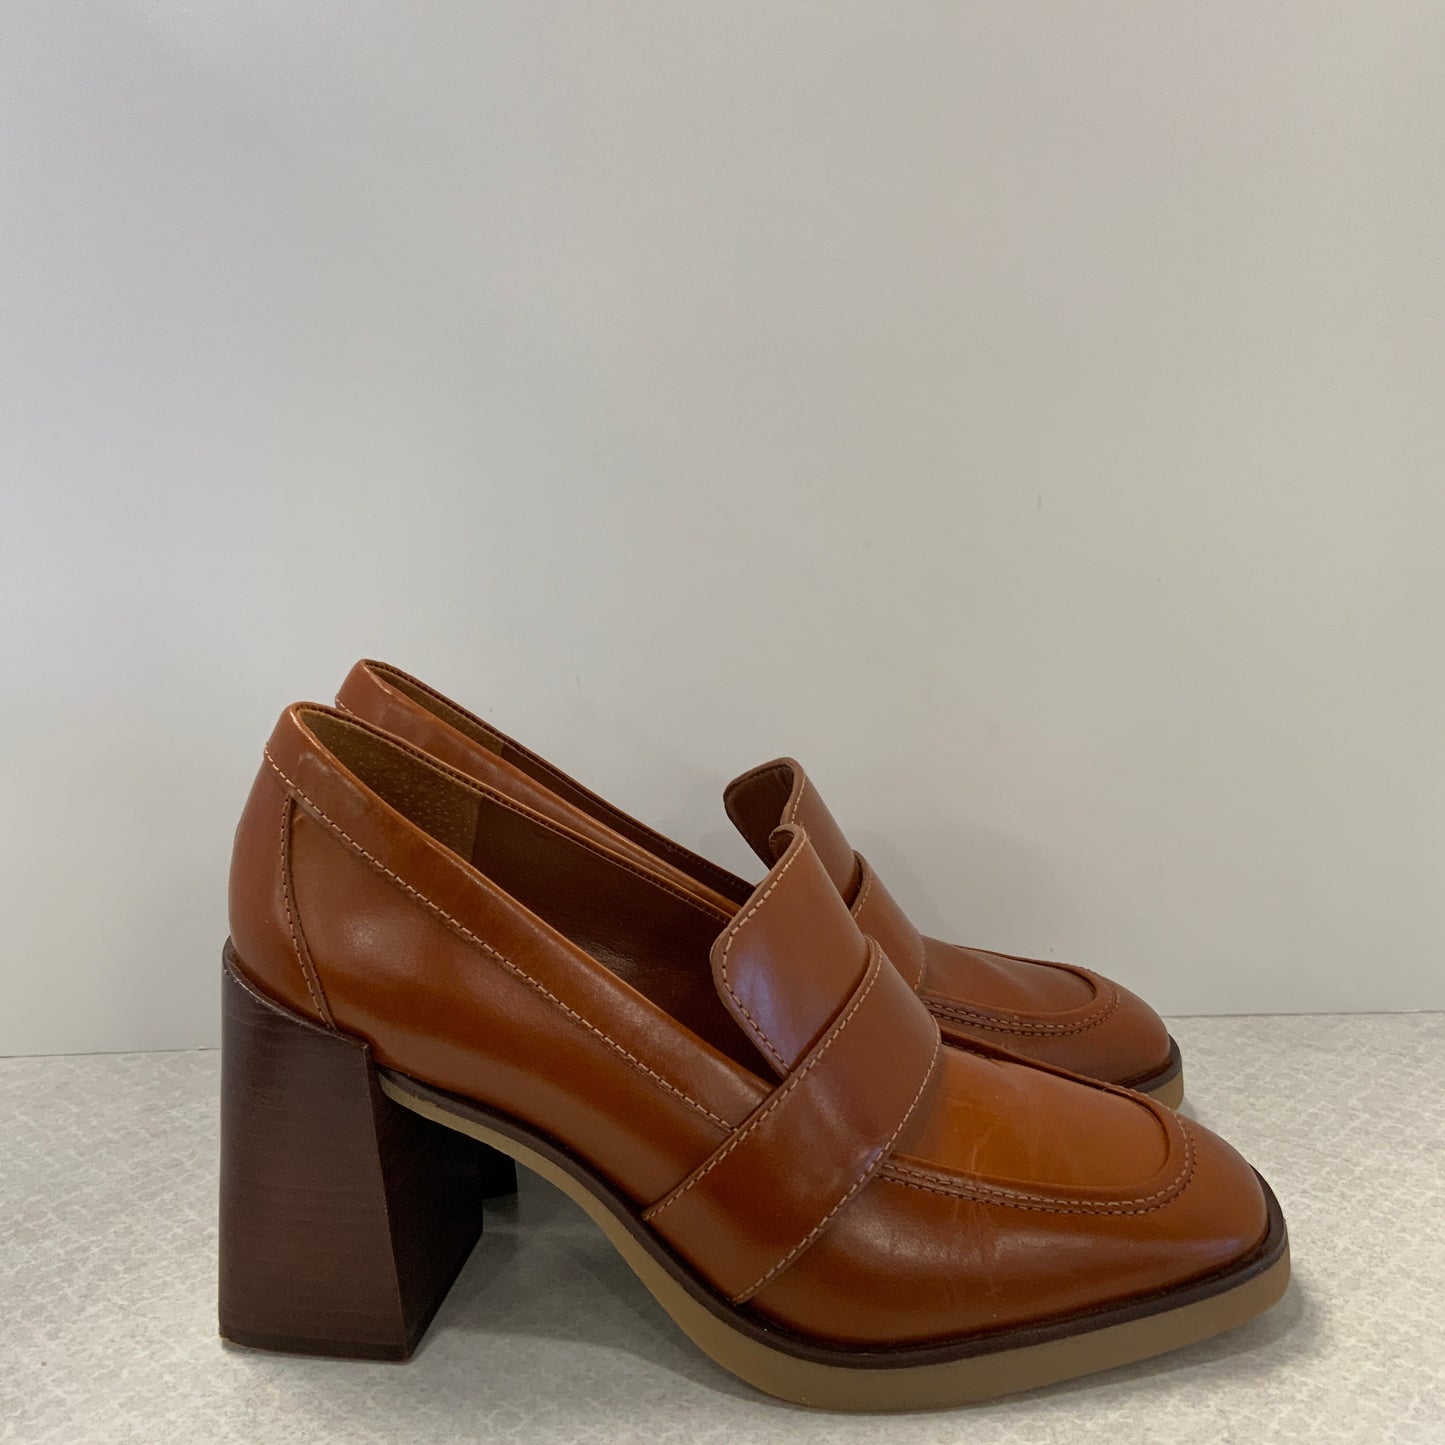 Brown Shoes Heels Block Vince Camuto, Size 8.5